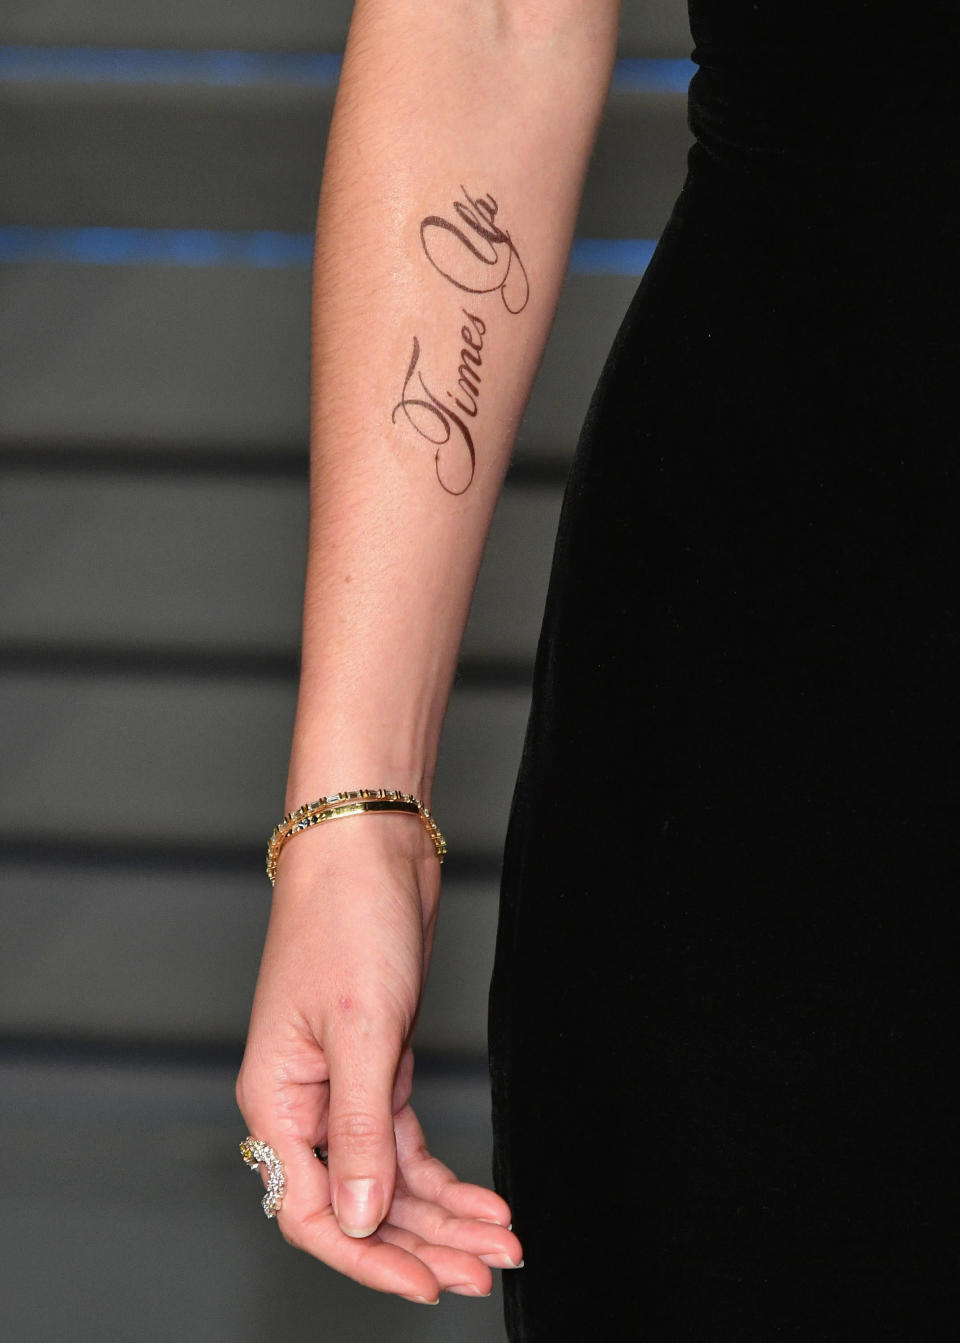 It’s not known whether the inking was permanent or temporary. (Photo: Getty)